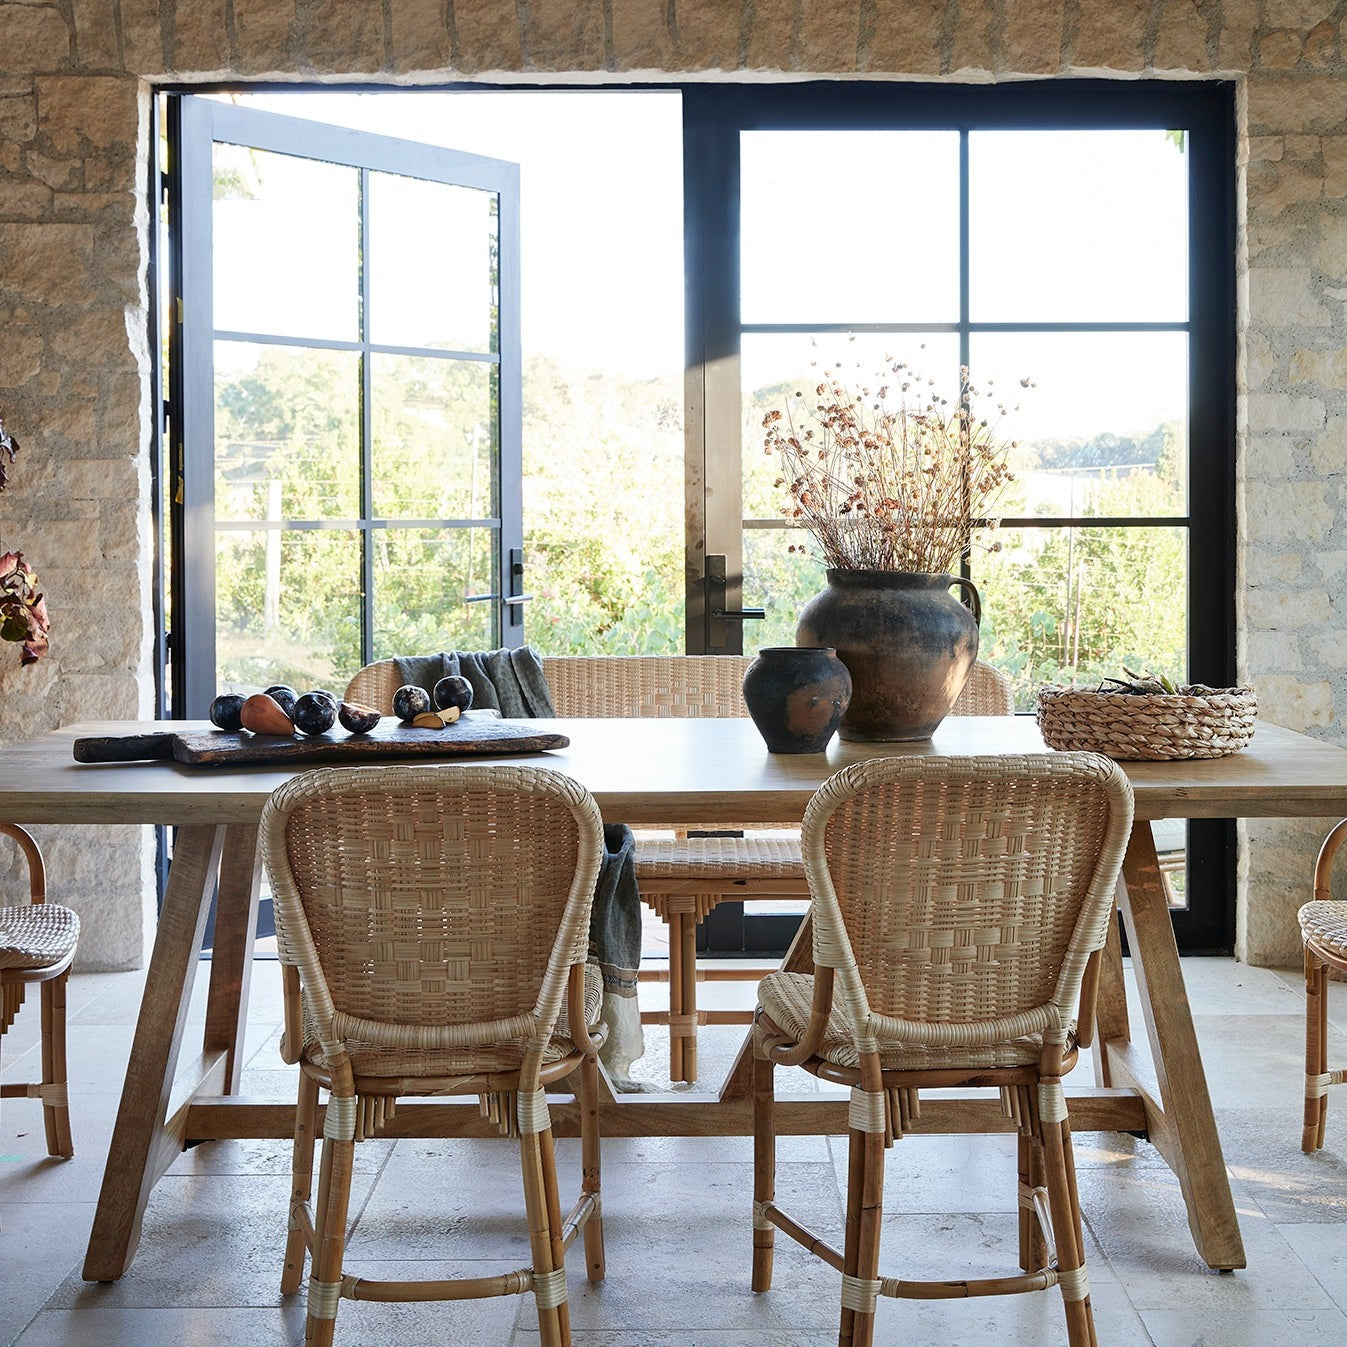 fota bistro side chairs in natural at dining table